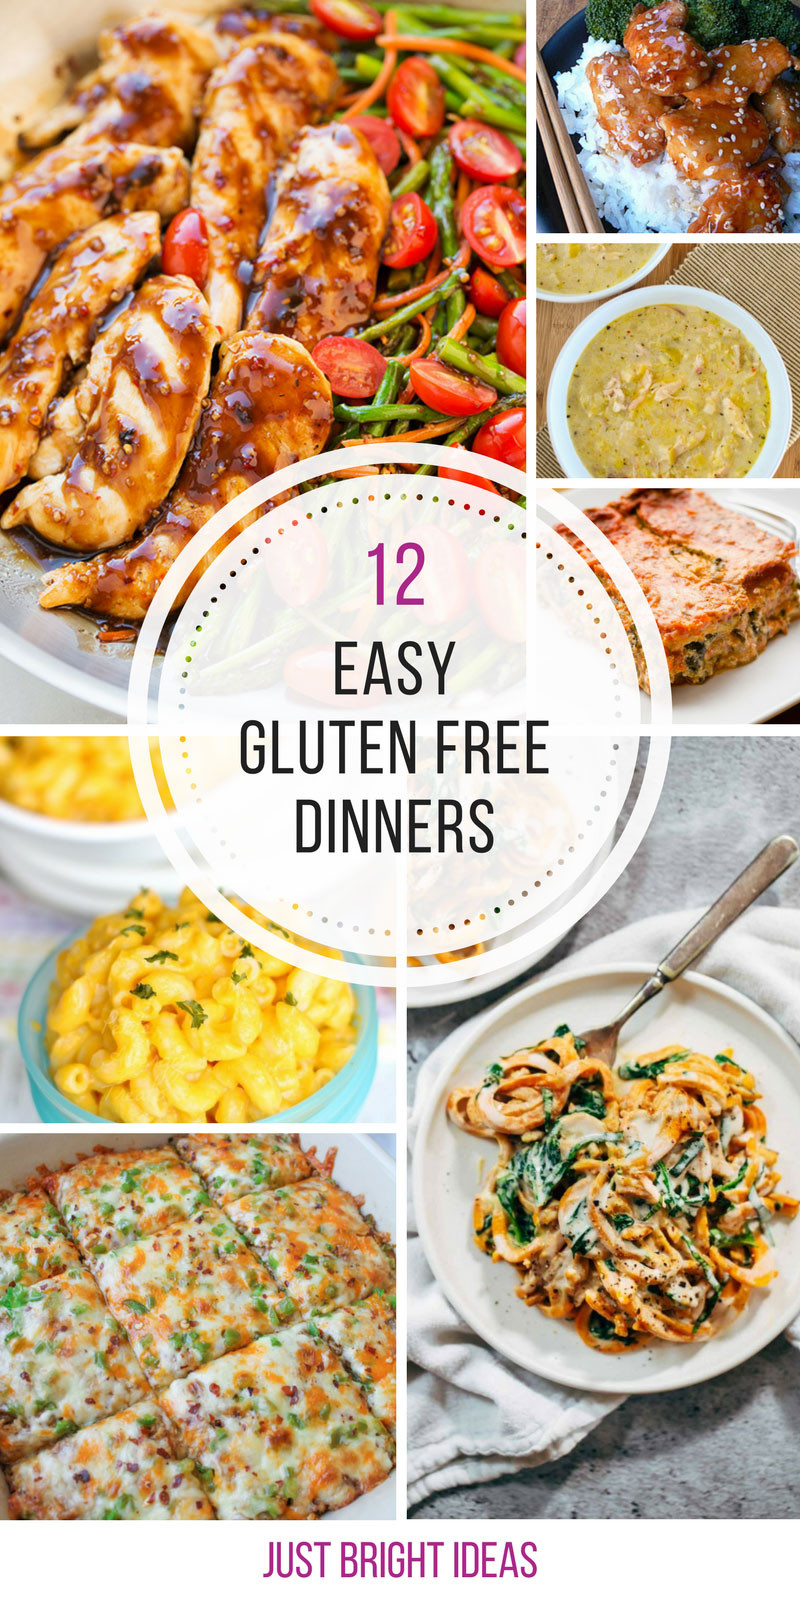 Easy Dairy Free Dinner Recipes 12 Easy Gluten Free Dinner Recipes Your Family Will Love